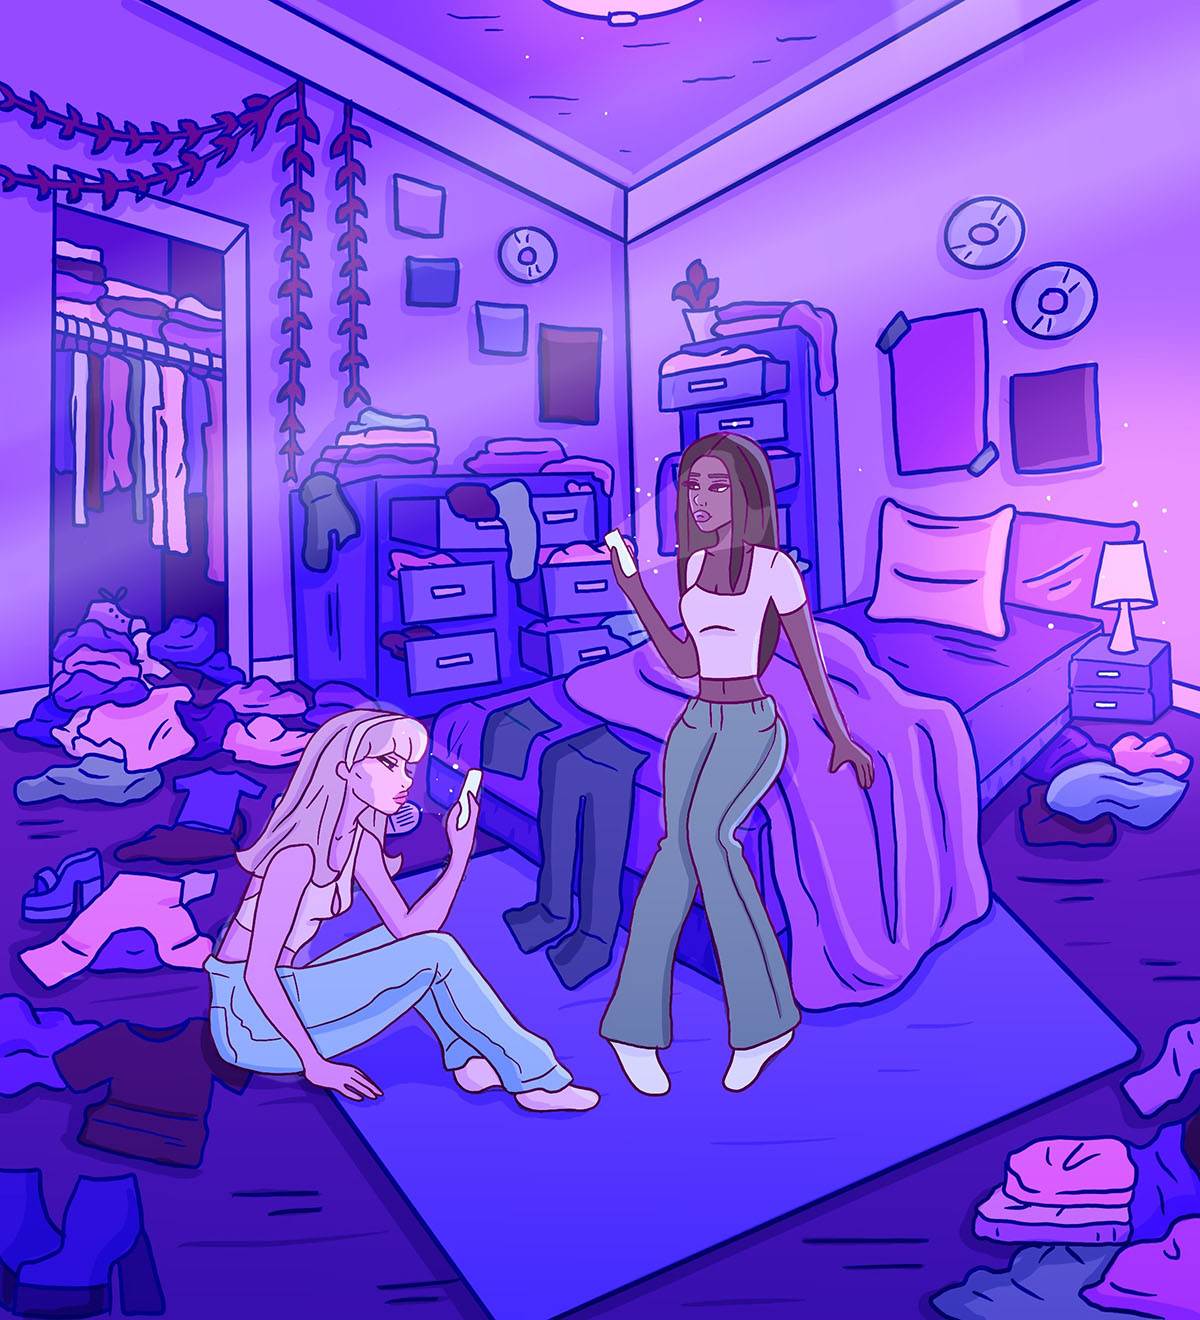 Two teens stare at their phones surrounded by clothes.